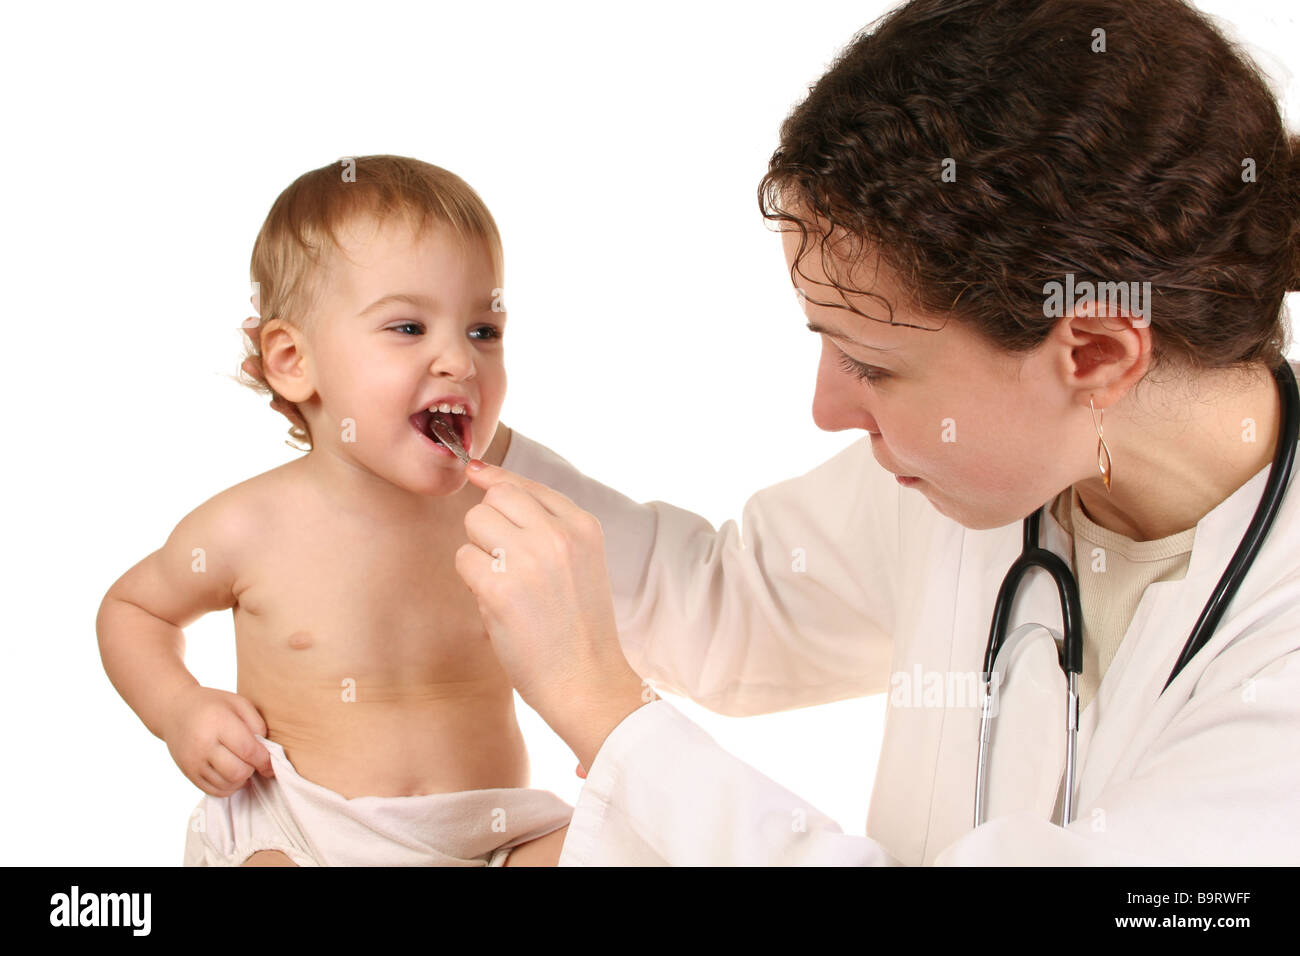 doctor with baby 2 Stock Photo